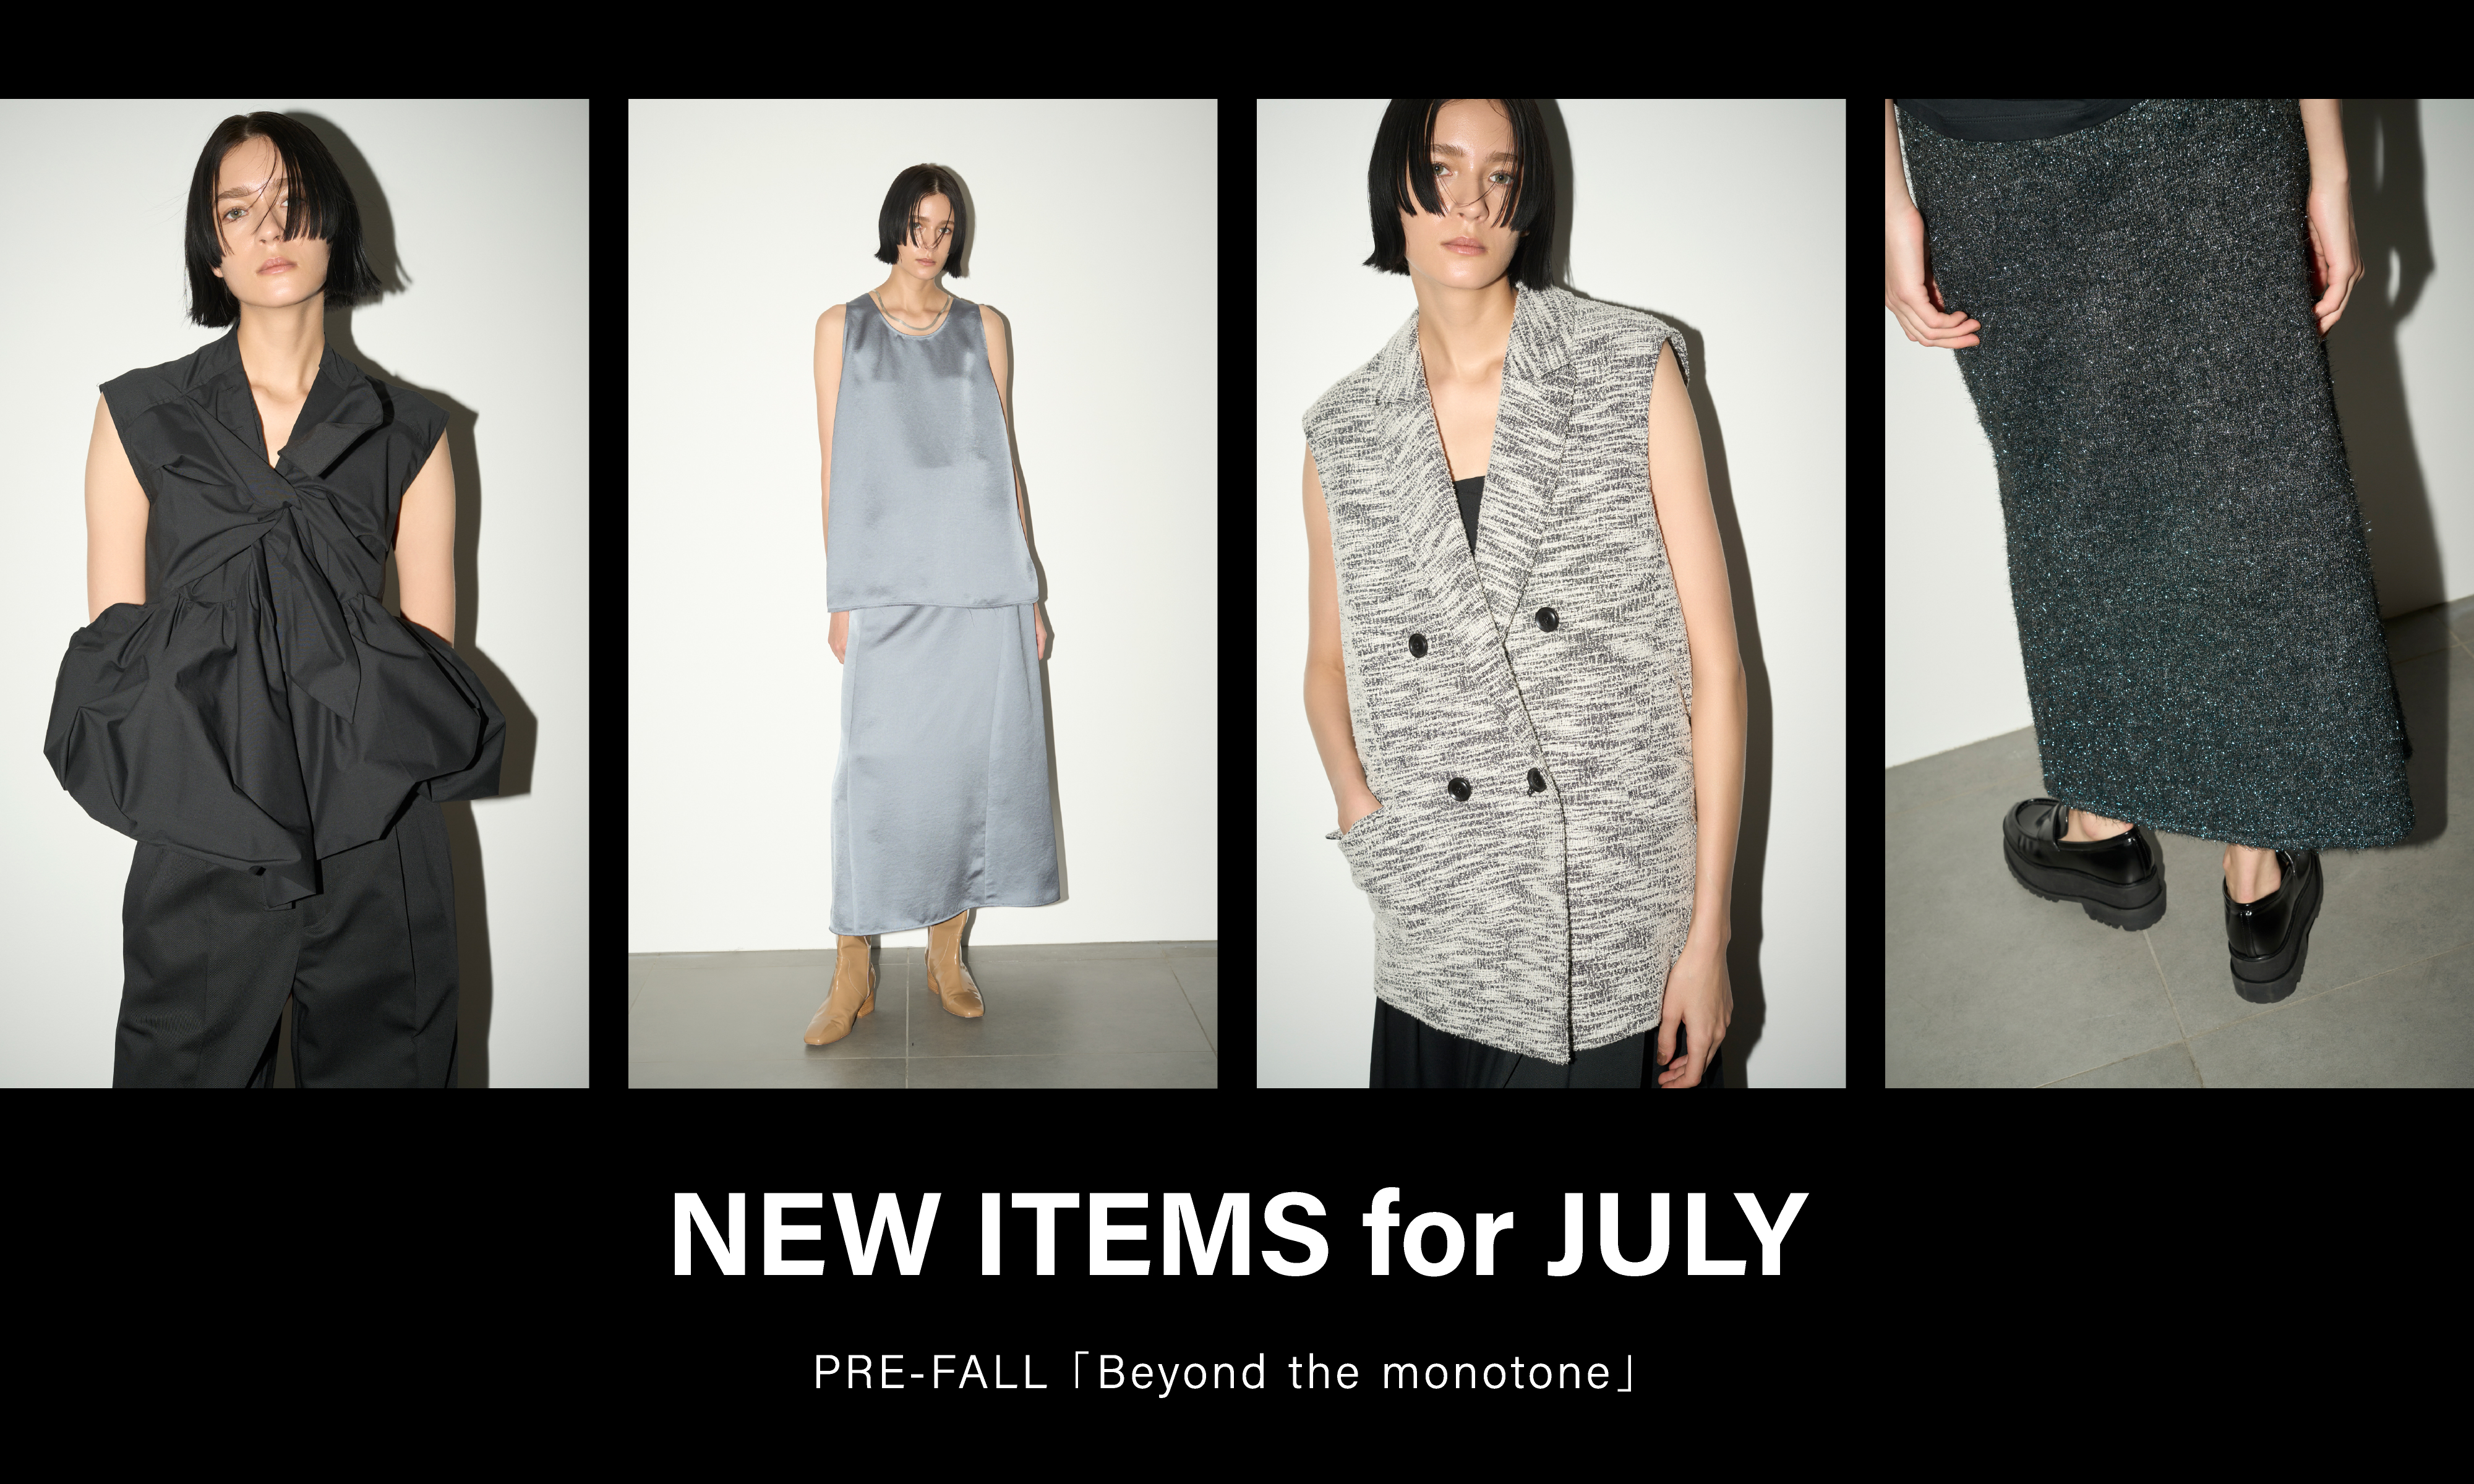 NEW ITEMS for JULY PRE-FALL「Beyond the monotone」